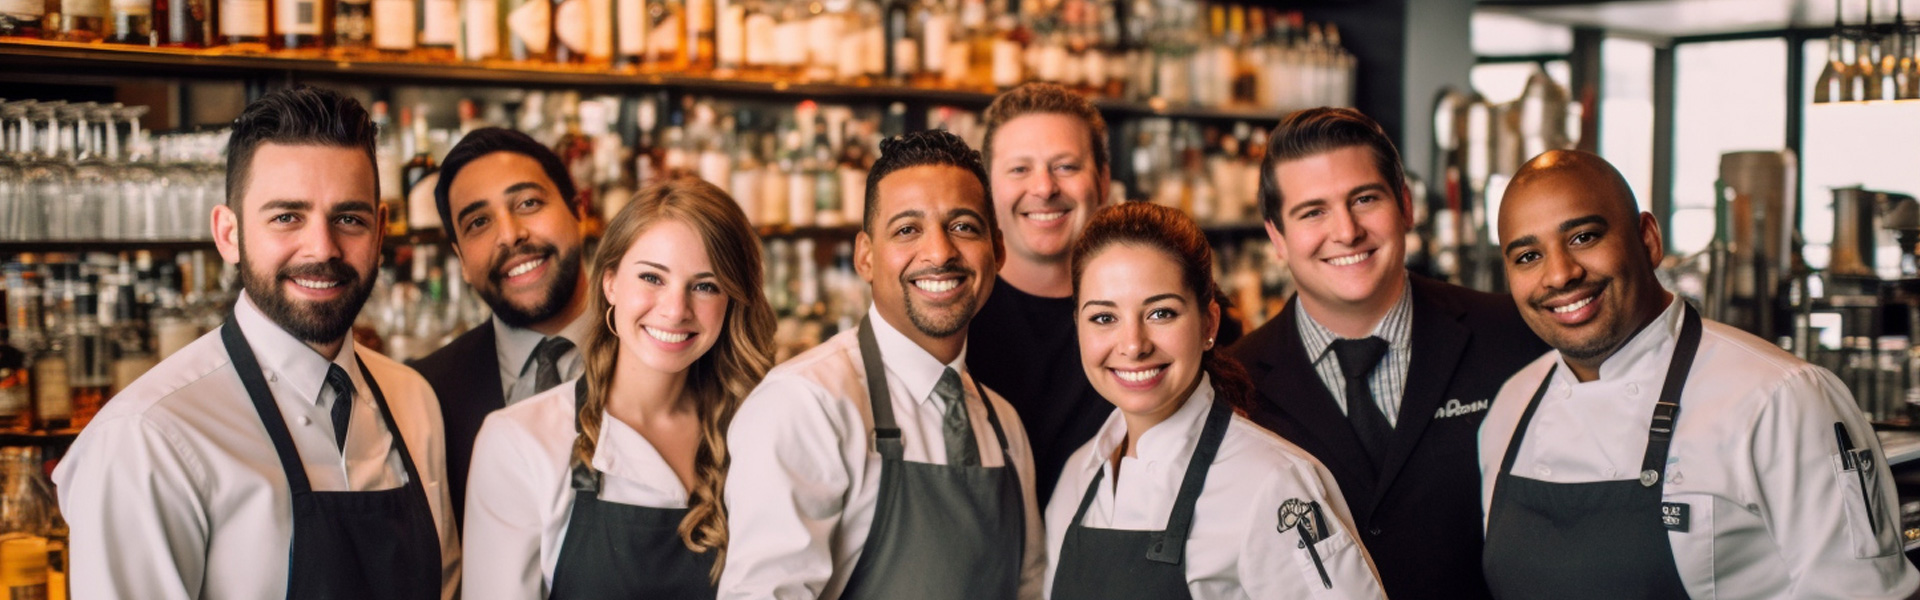 Alcohol training for bartender license of servers and managers